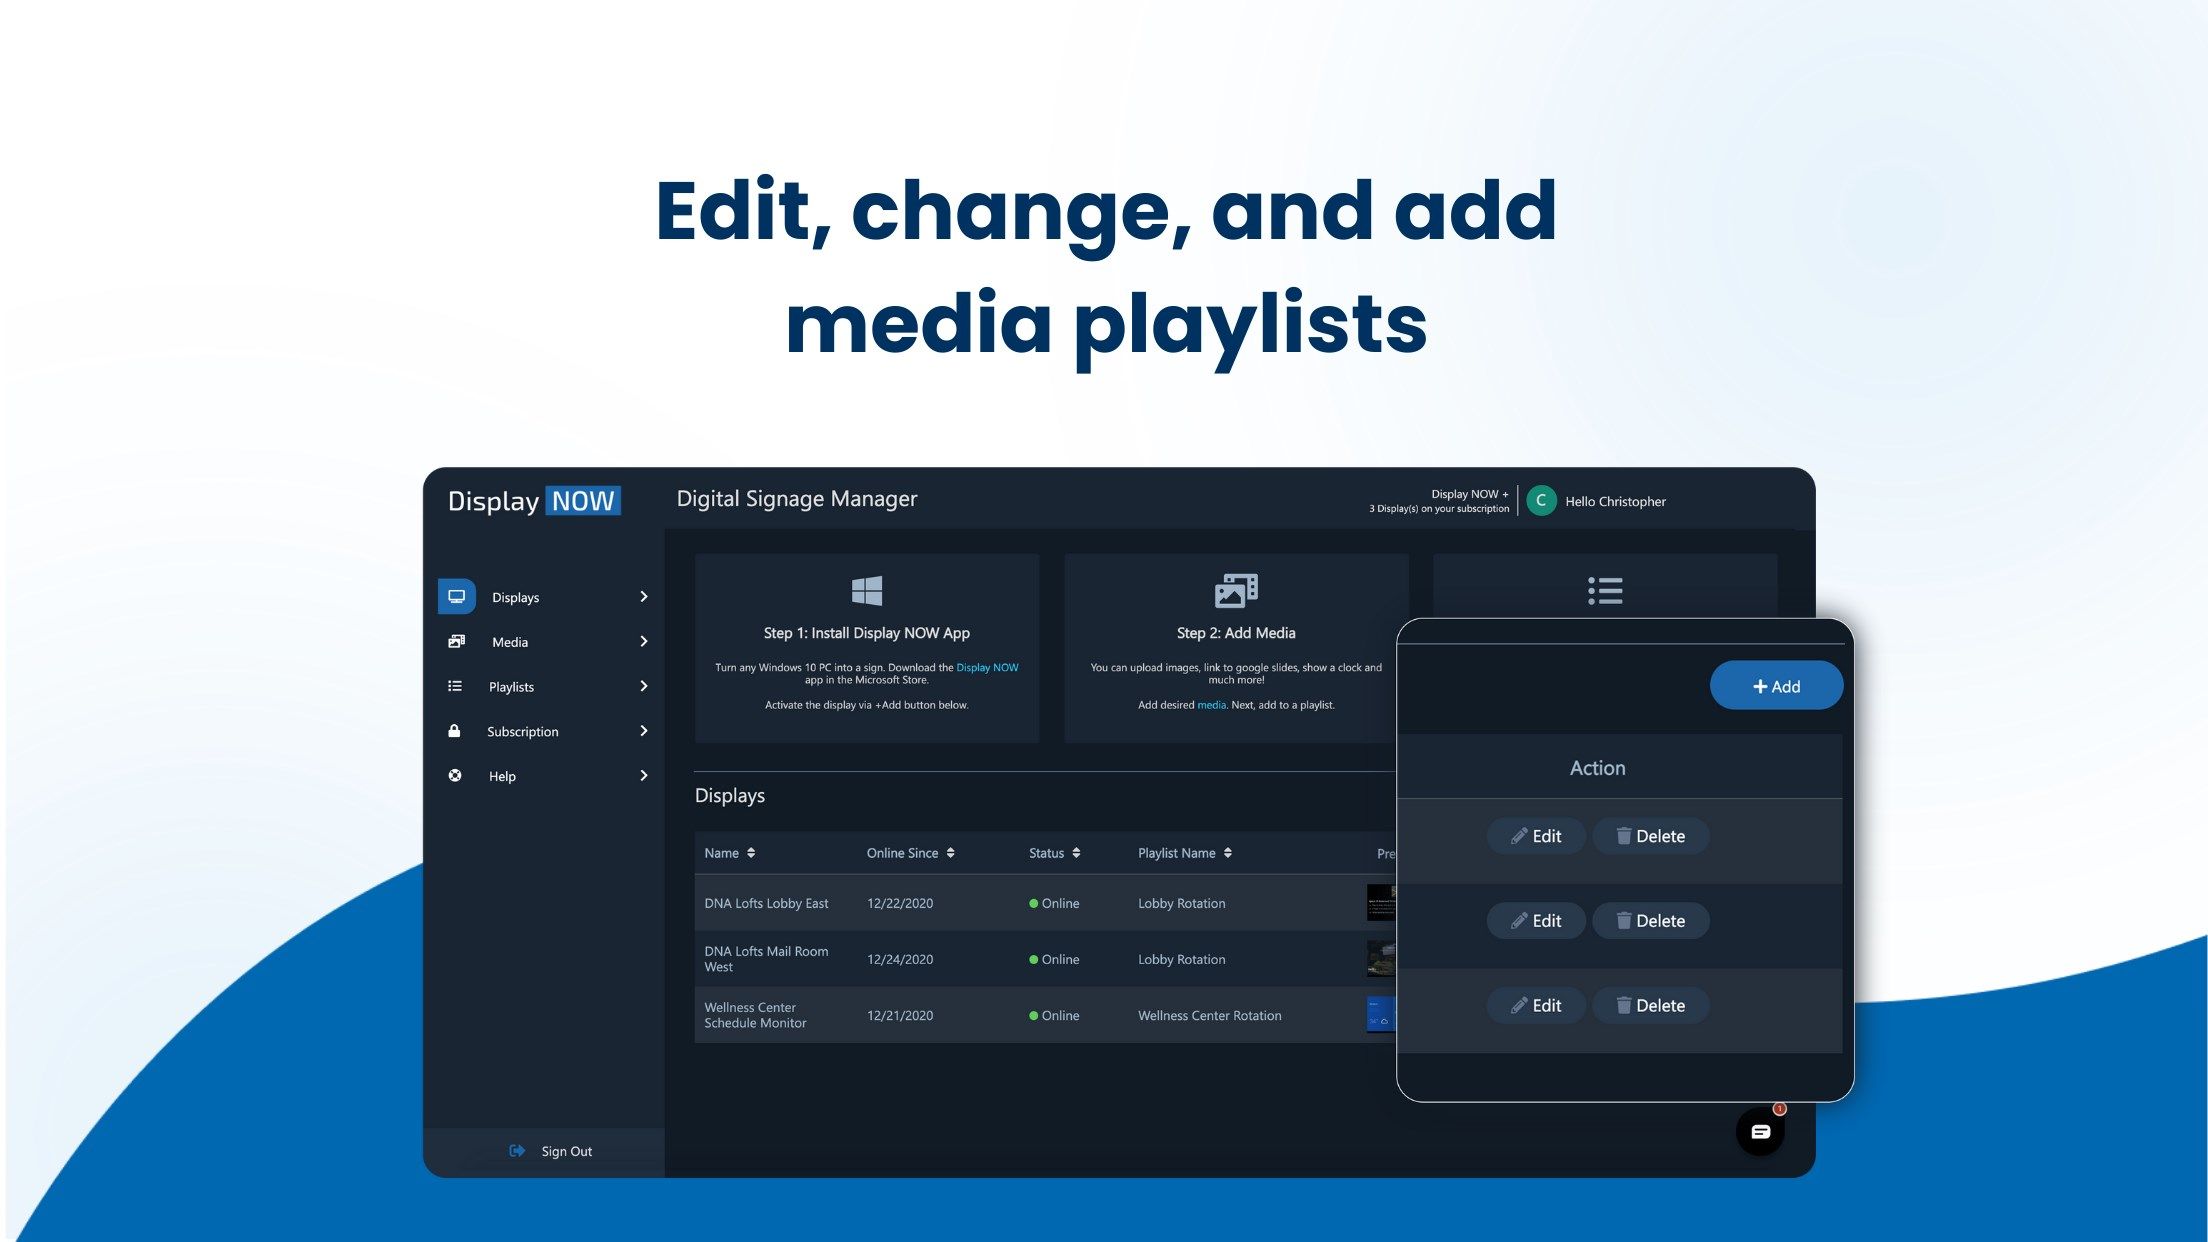 Edit, change and add media to playlists.